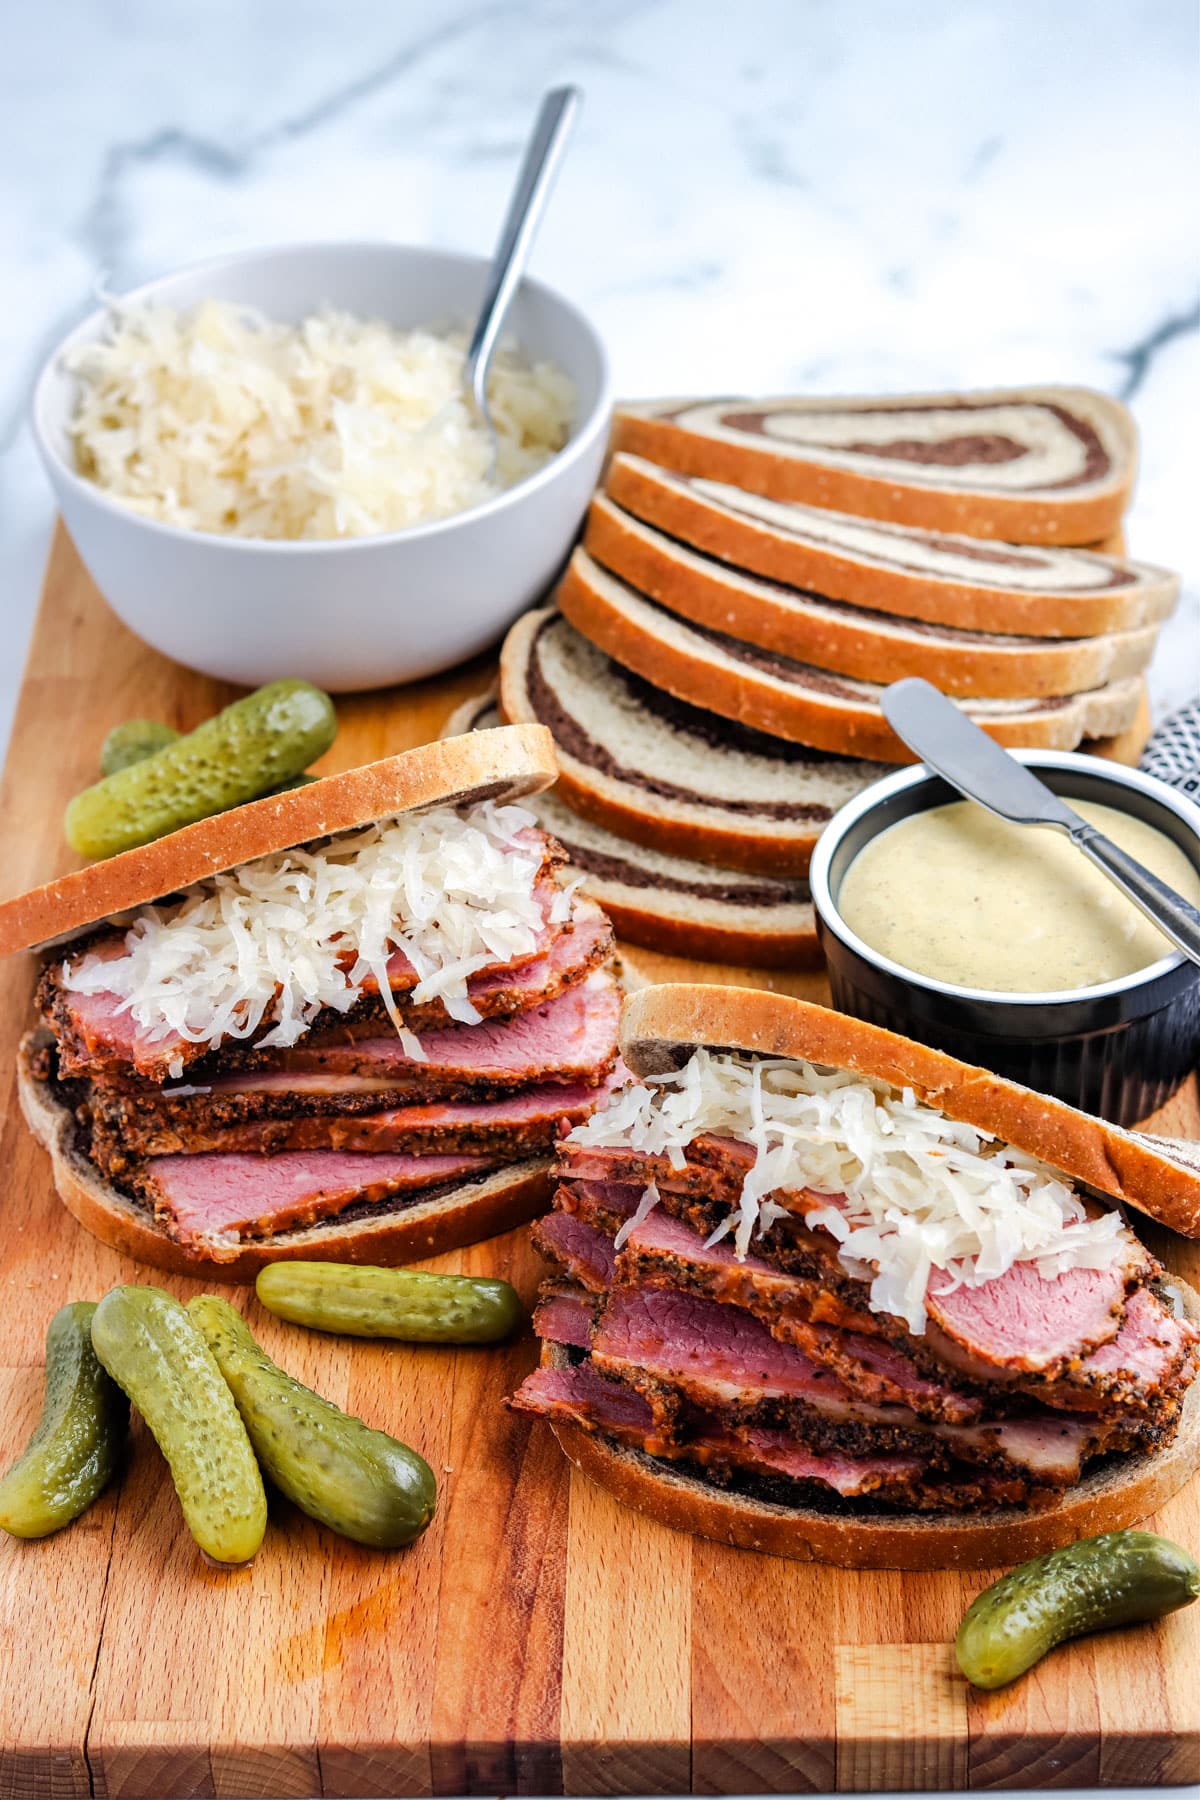 Assembled pastrami sandwiches on a wood cutting board.